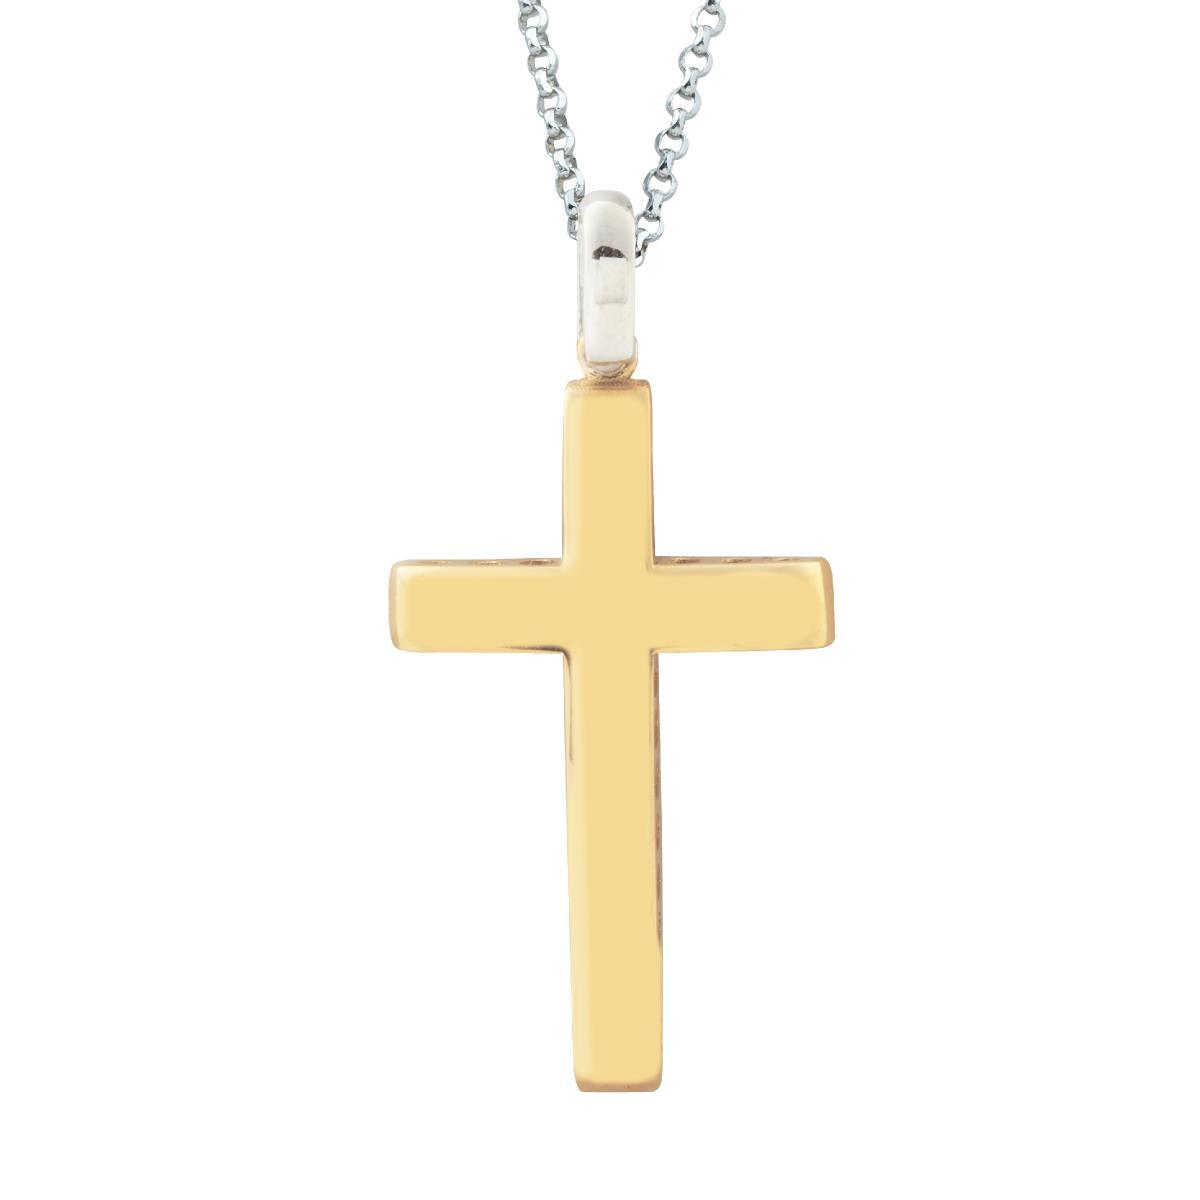 Necklace with white gold chain and 18kt yellow gold cross - CEA2472-LO